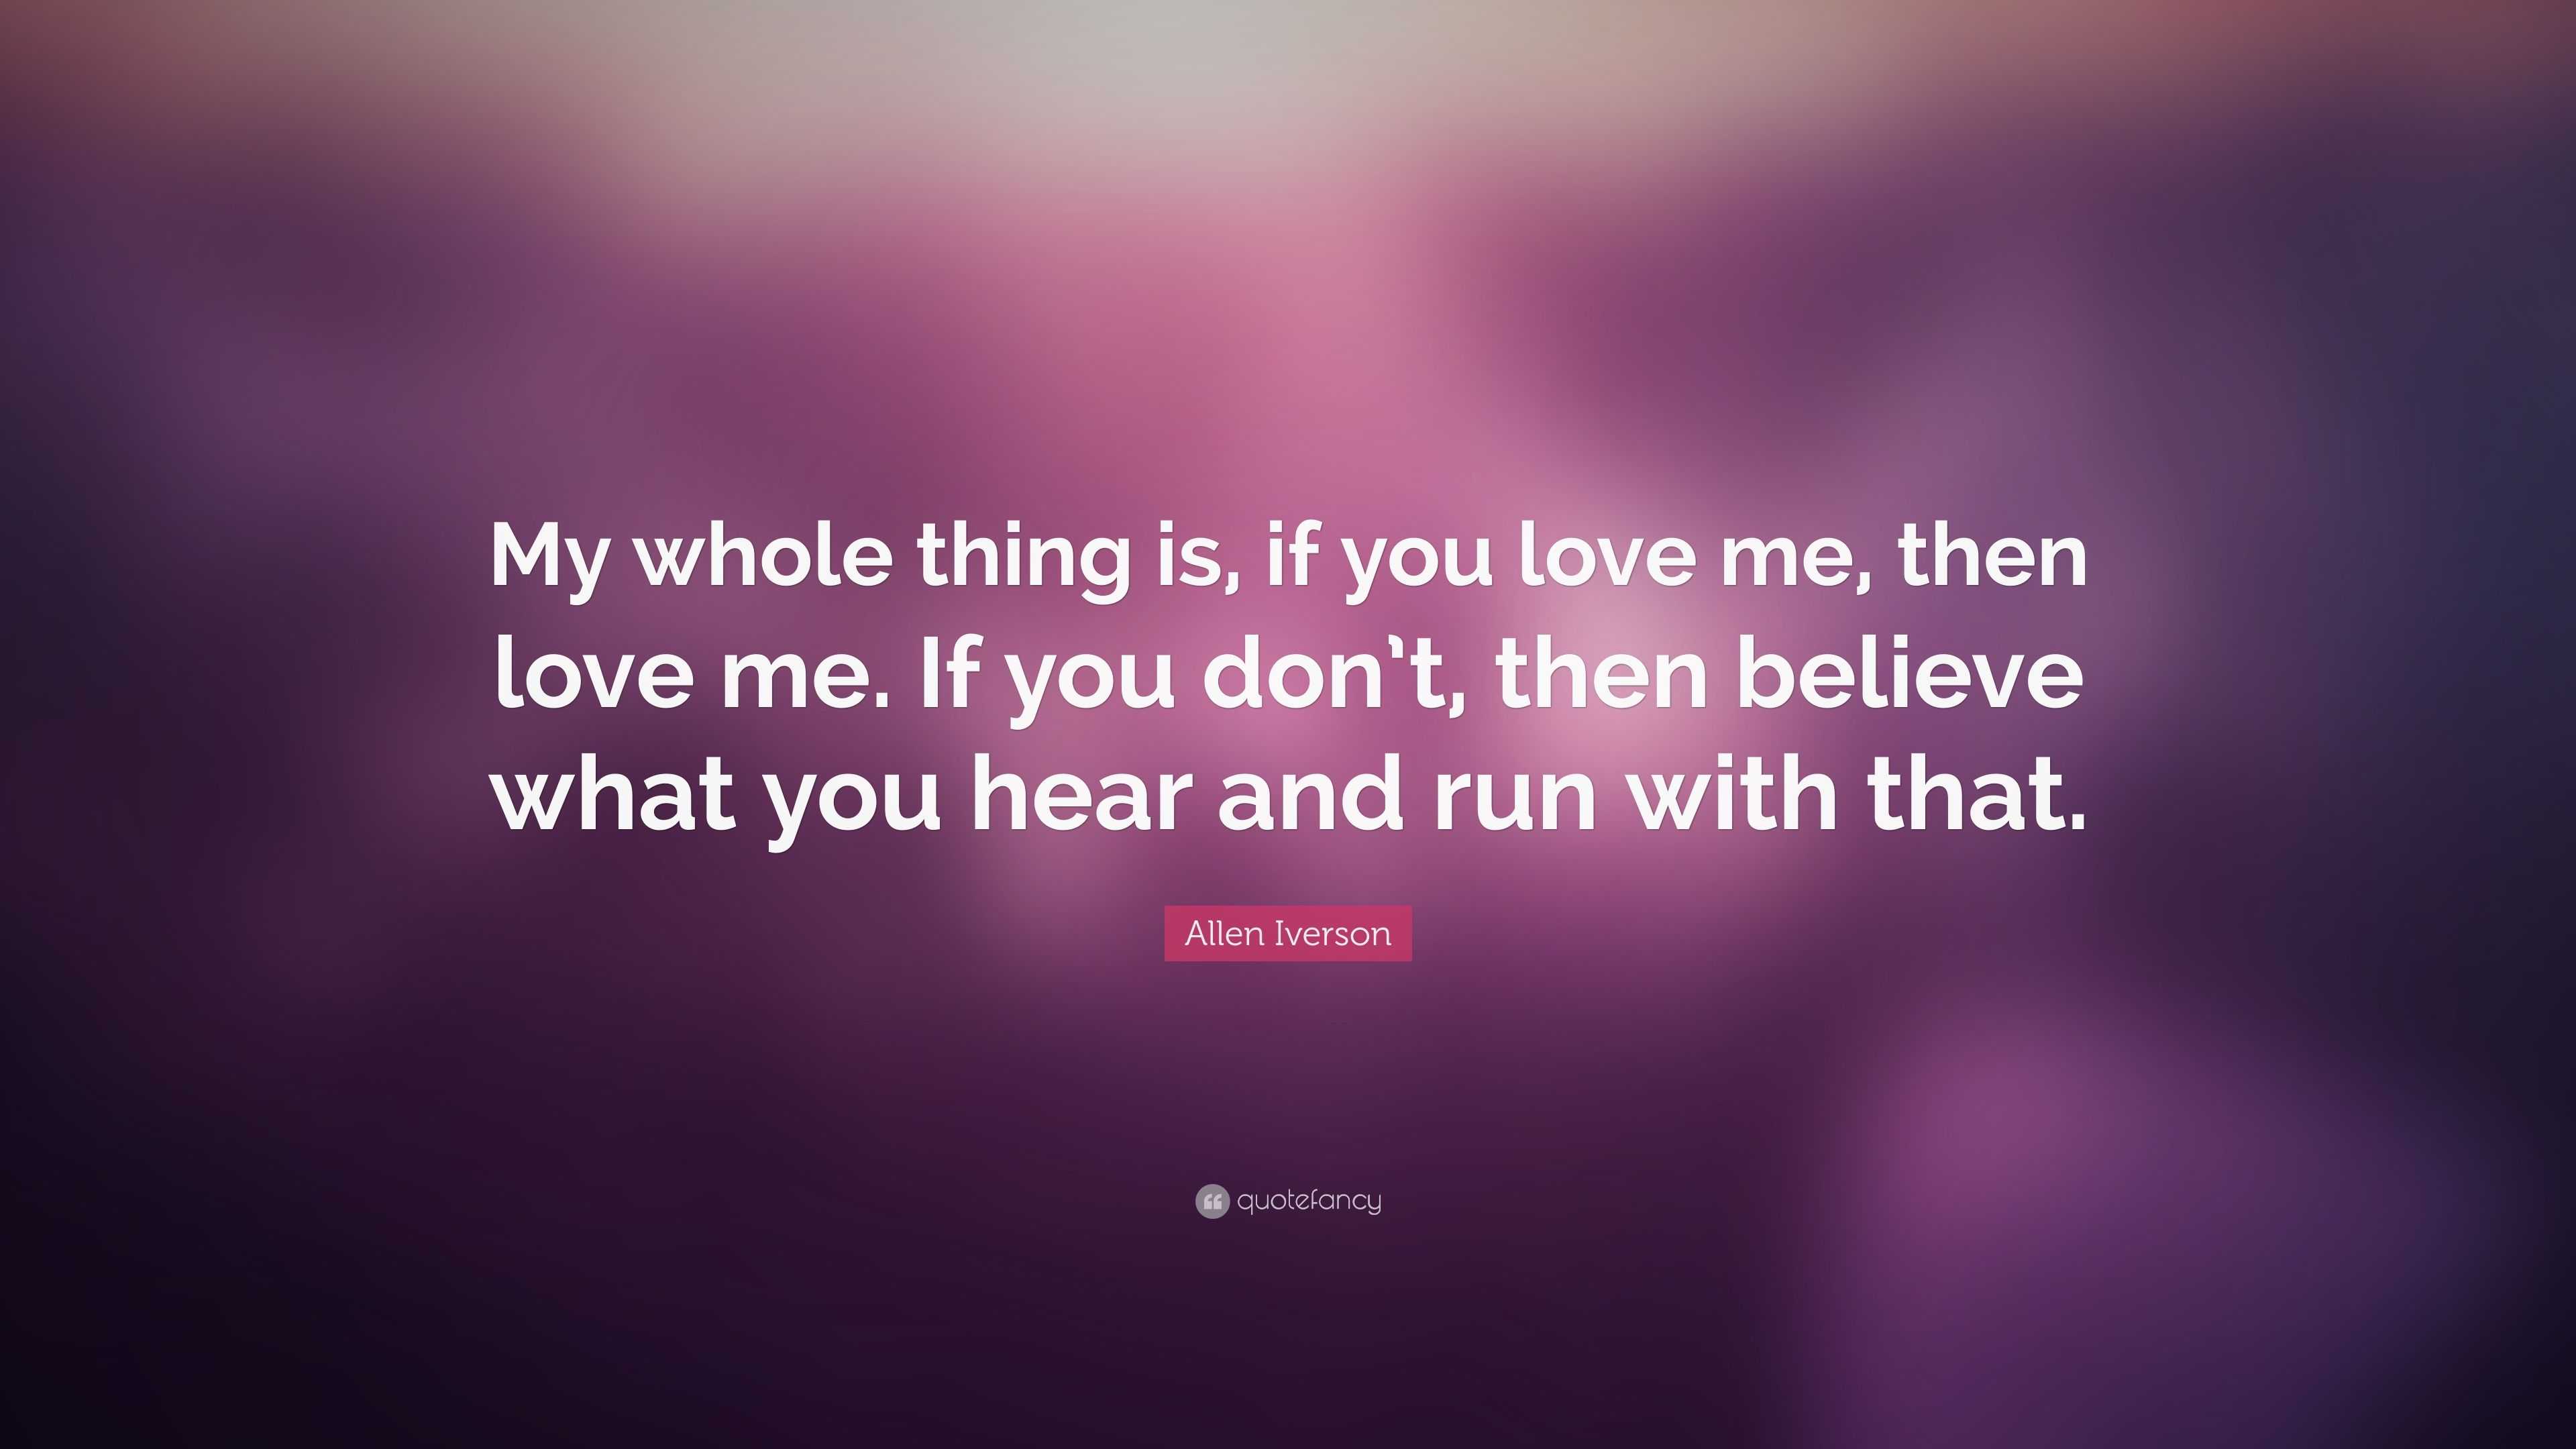 Allen Iverson Quote: “My Whole Thing Is, If You Love Me, Then Love Me. If You